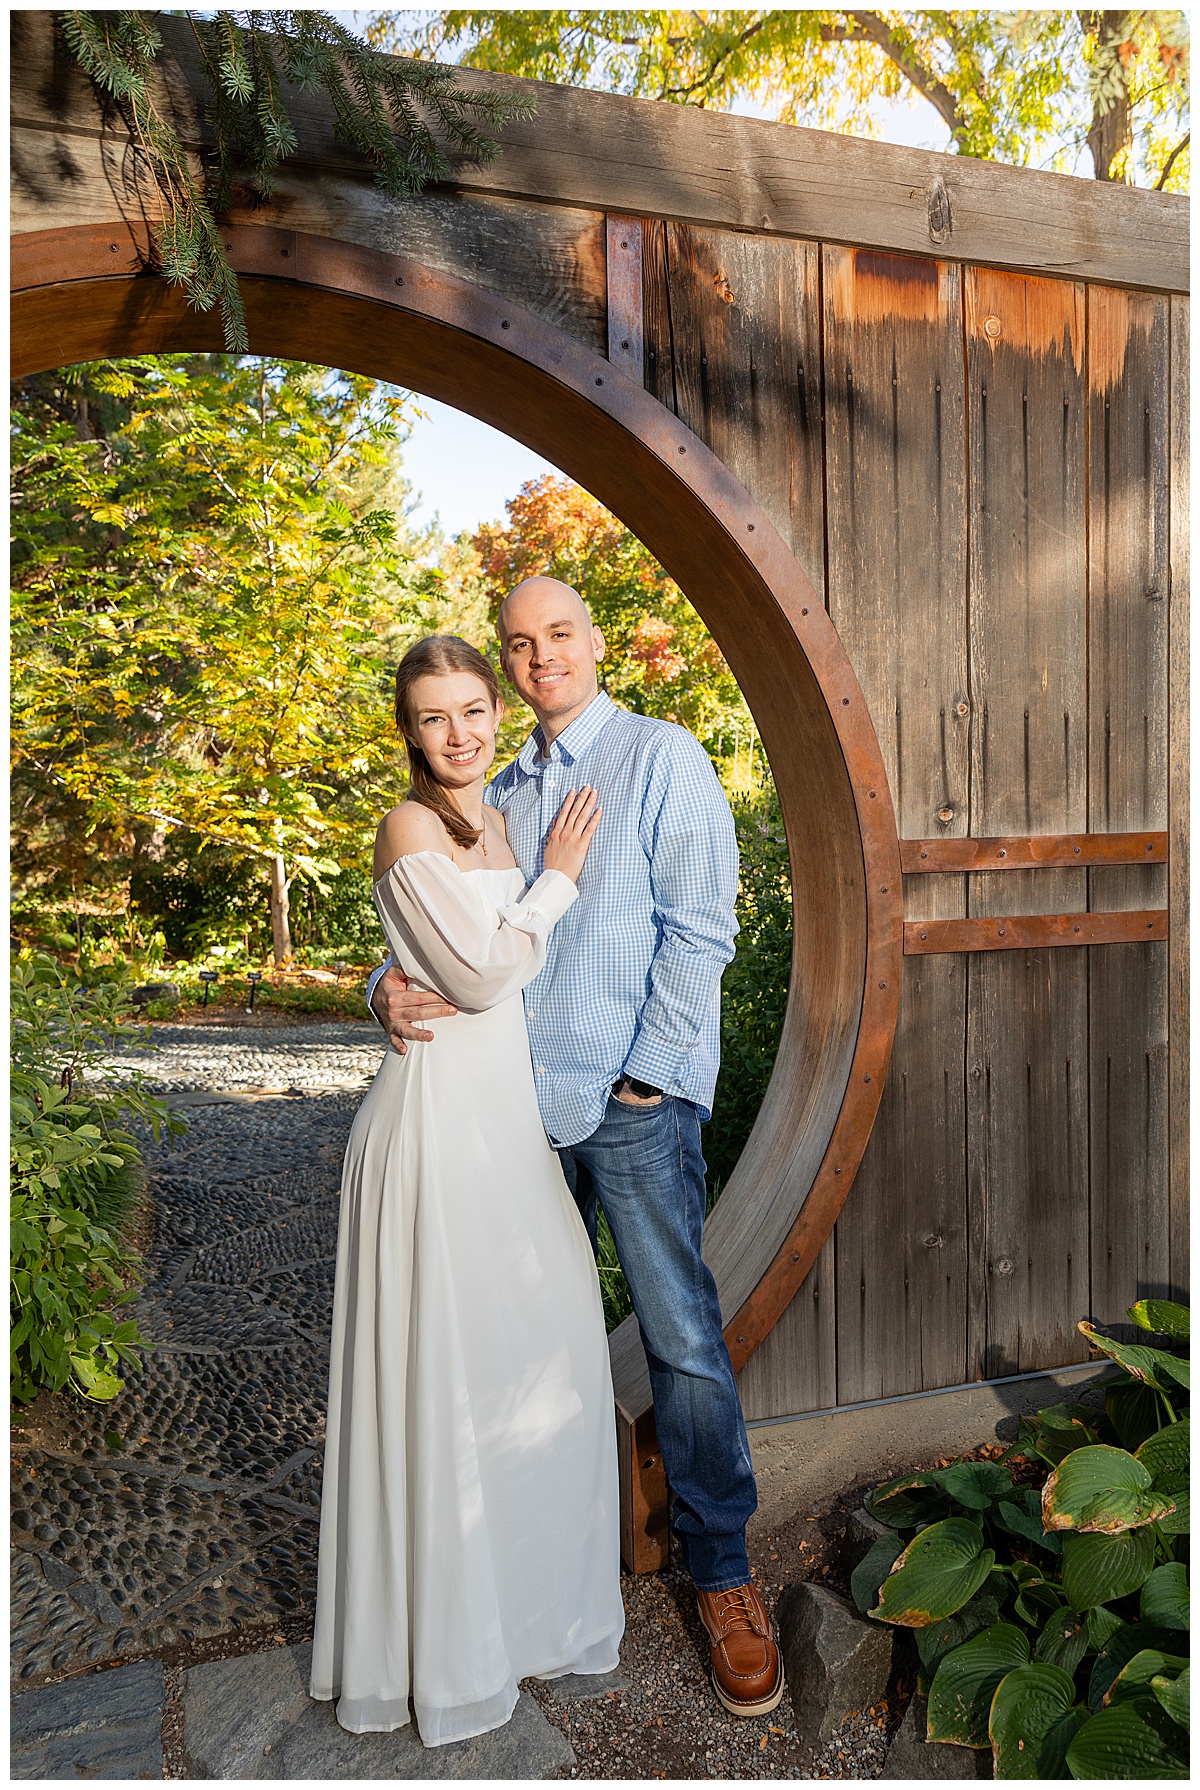 A couple poses in a wooden archway during their botanic gardens engagement session. The blonde woman is wearing a white long sleeve dress and the bald man is wearing a blue plaid shirt and jeans.